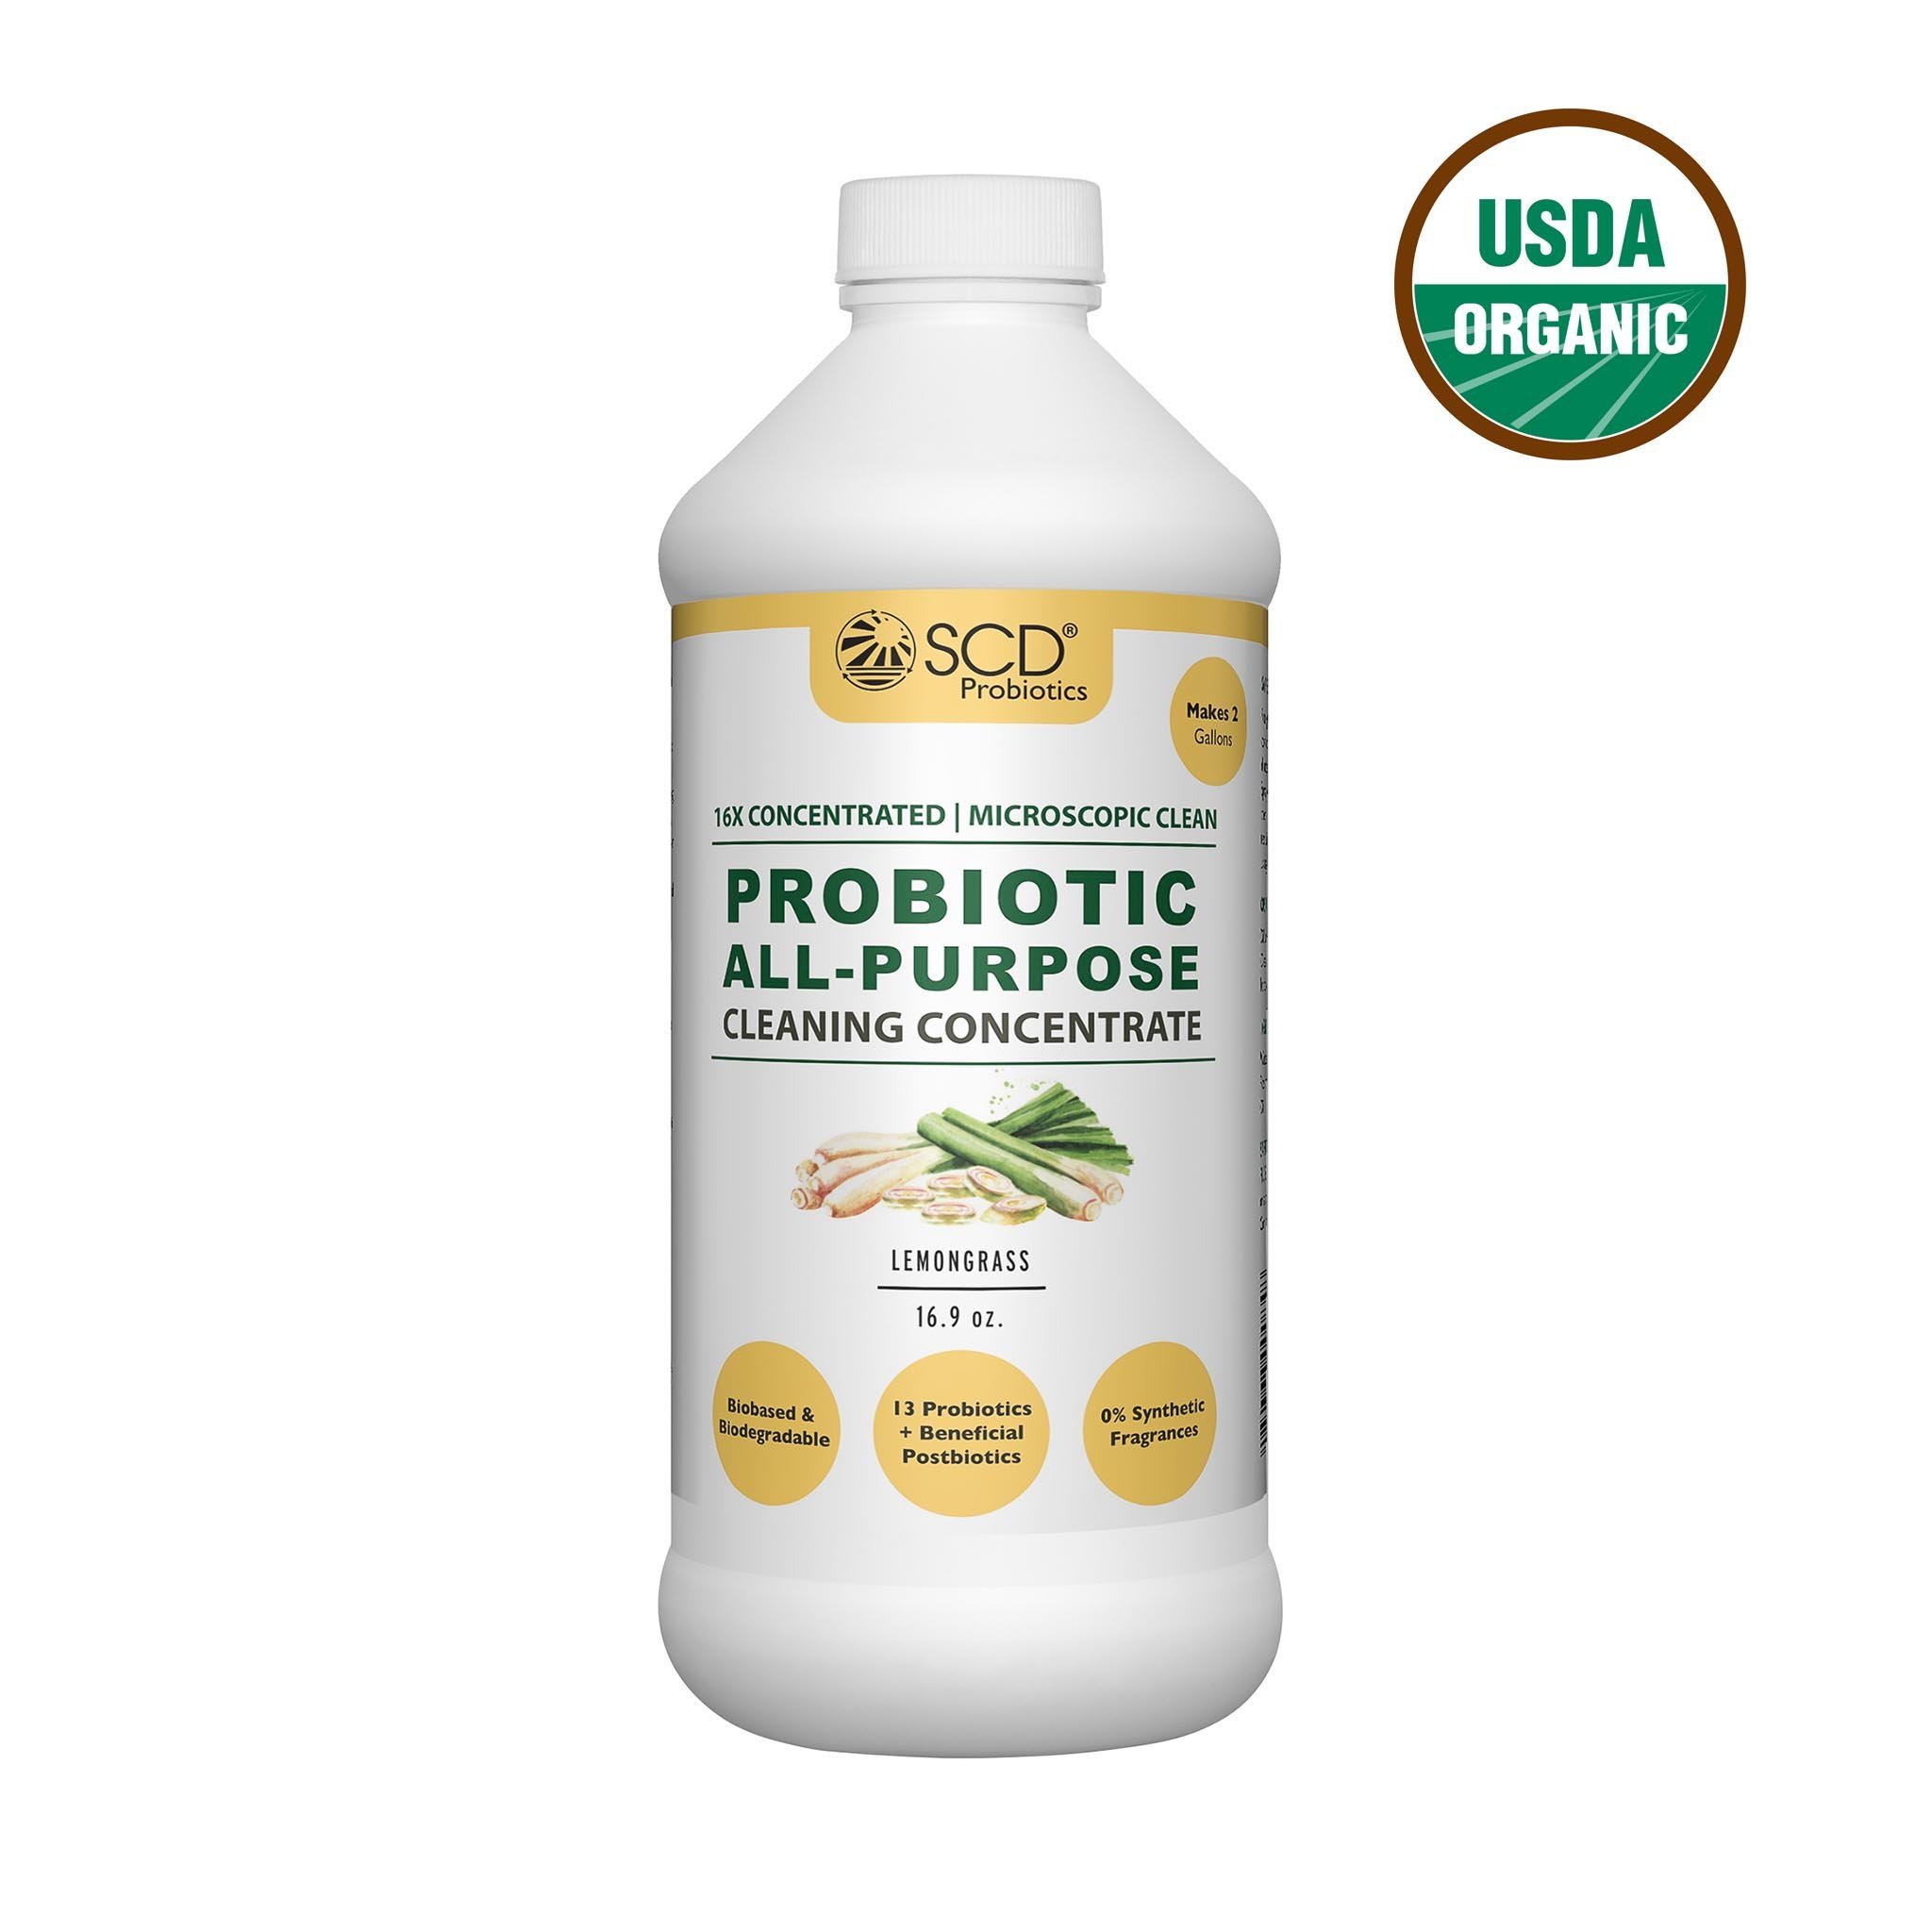 SCD Probiotic Lemongrass All-Purpose Cleaning Concentrate